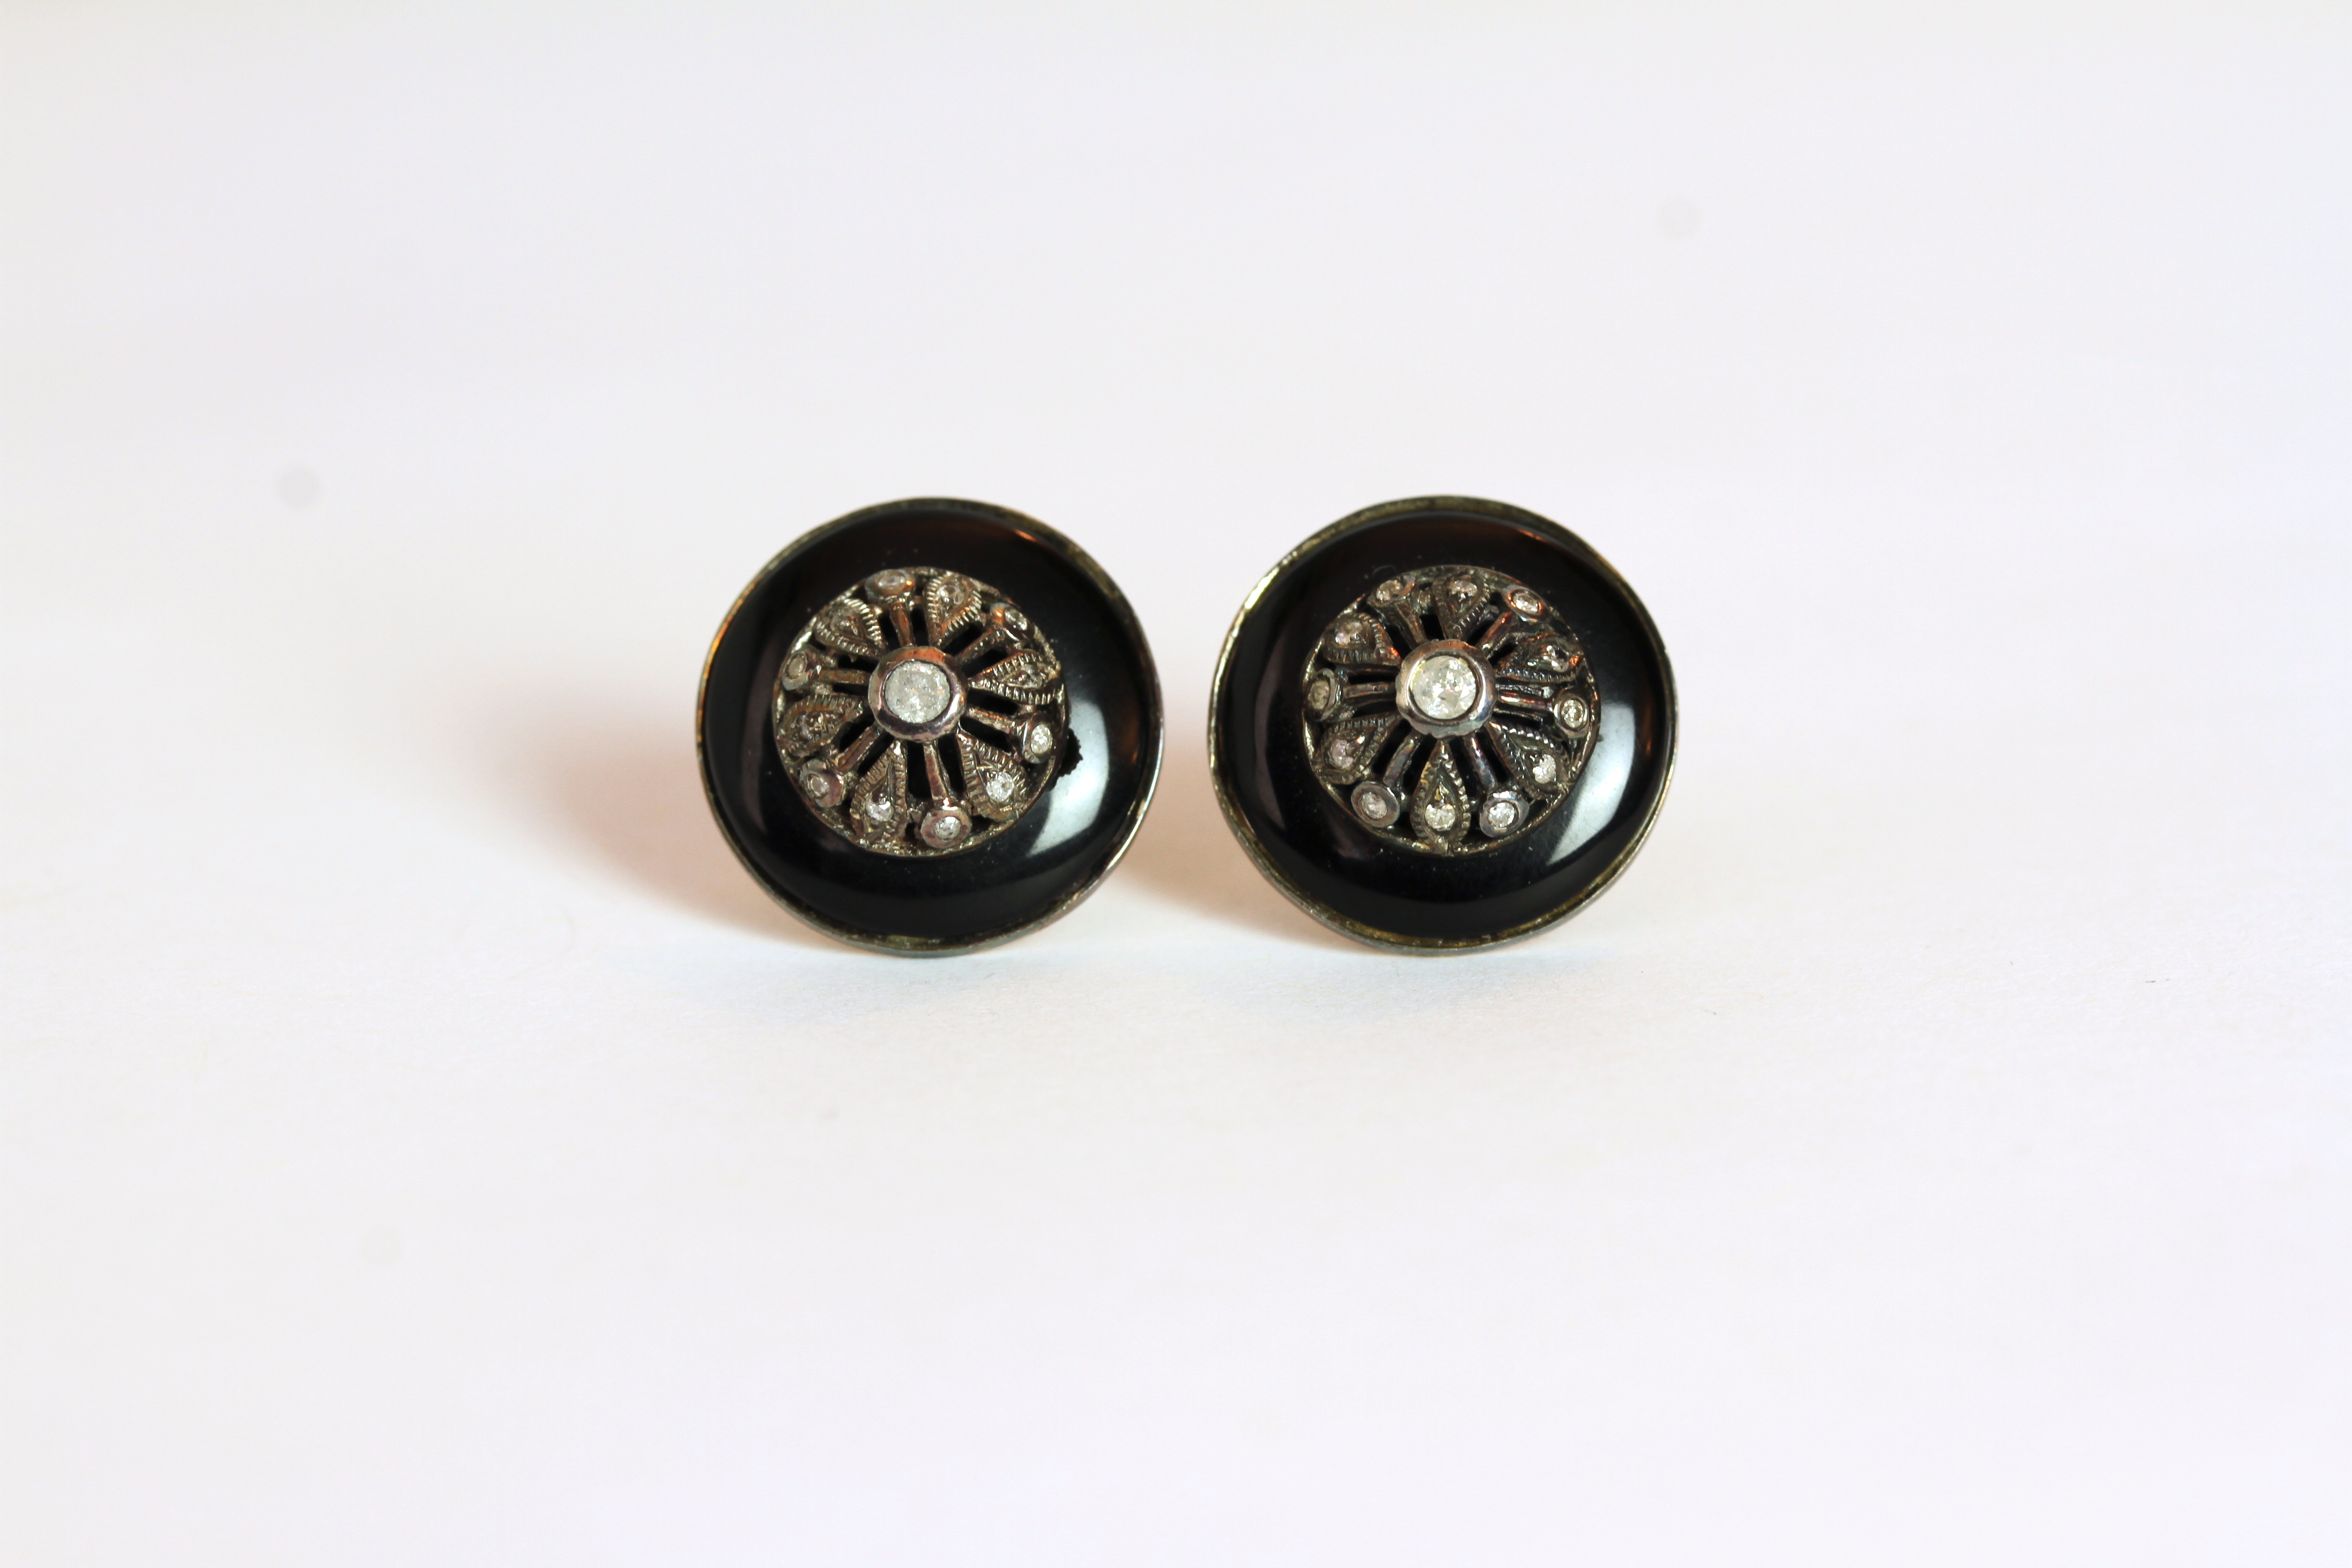 Pair of Diamond and Black Enamel stud earrings, each set with 13 diamonds, surrounded by black